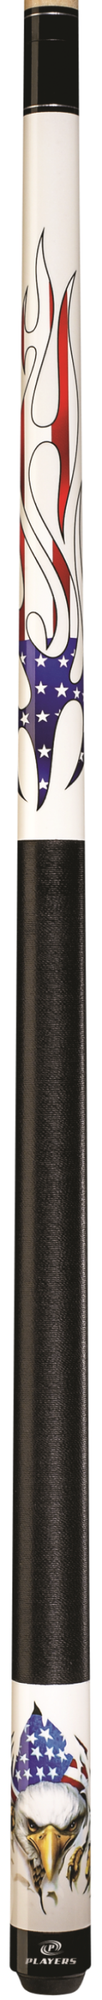 Players Players D-PEG Pool Cue Pool Cue